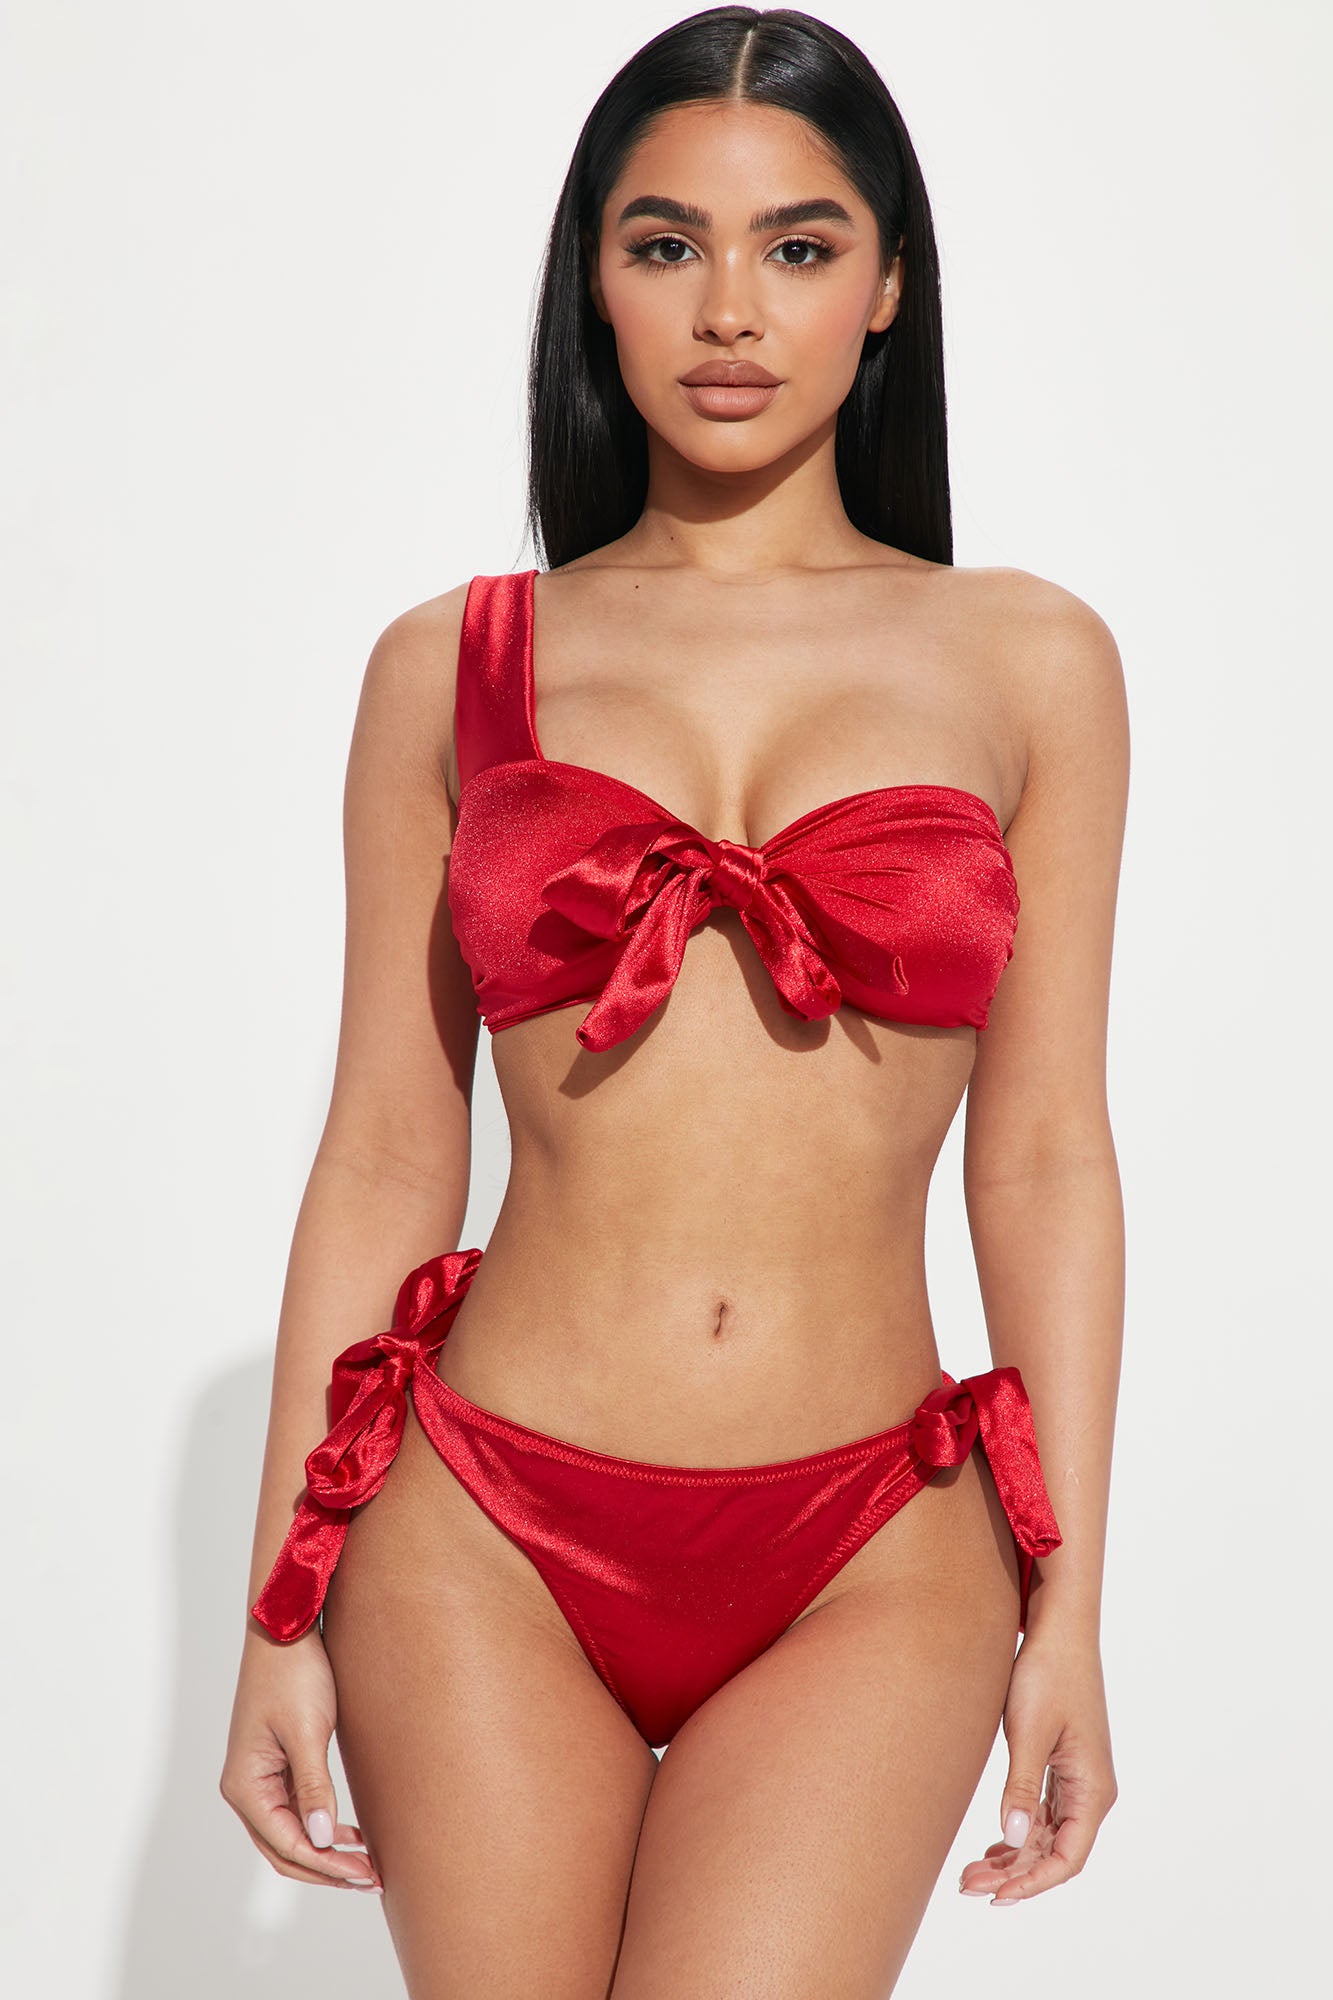 Fashion Red Panties and Bra Set As a Christmas Gift on the White